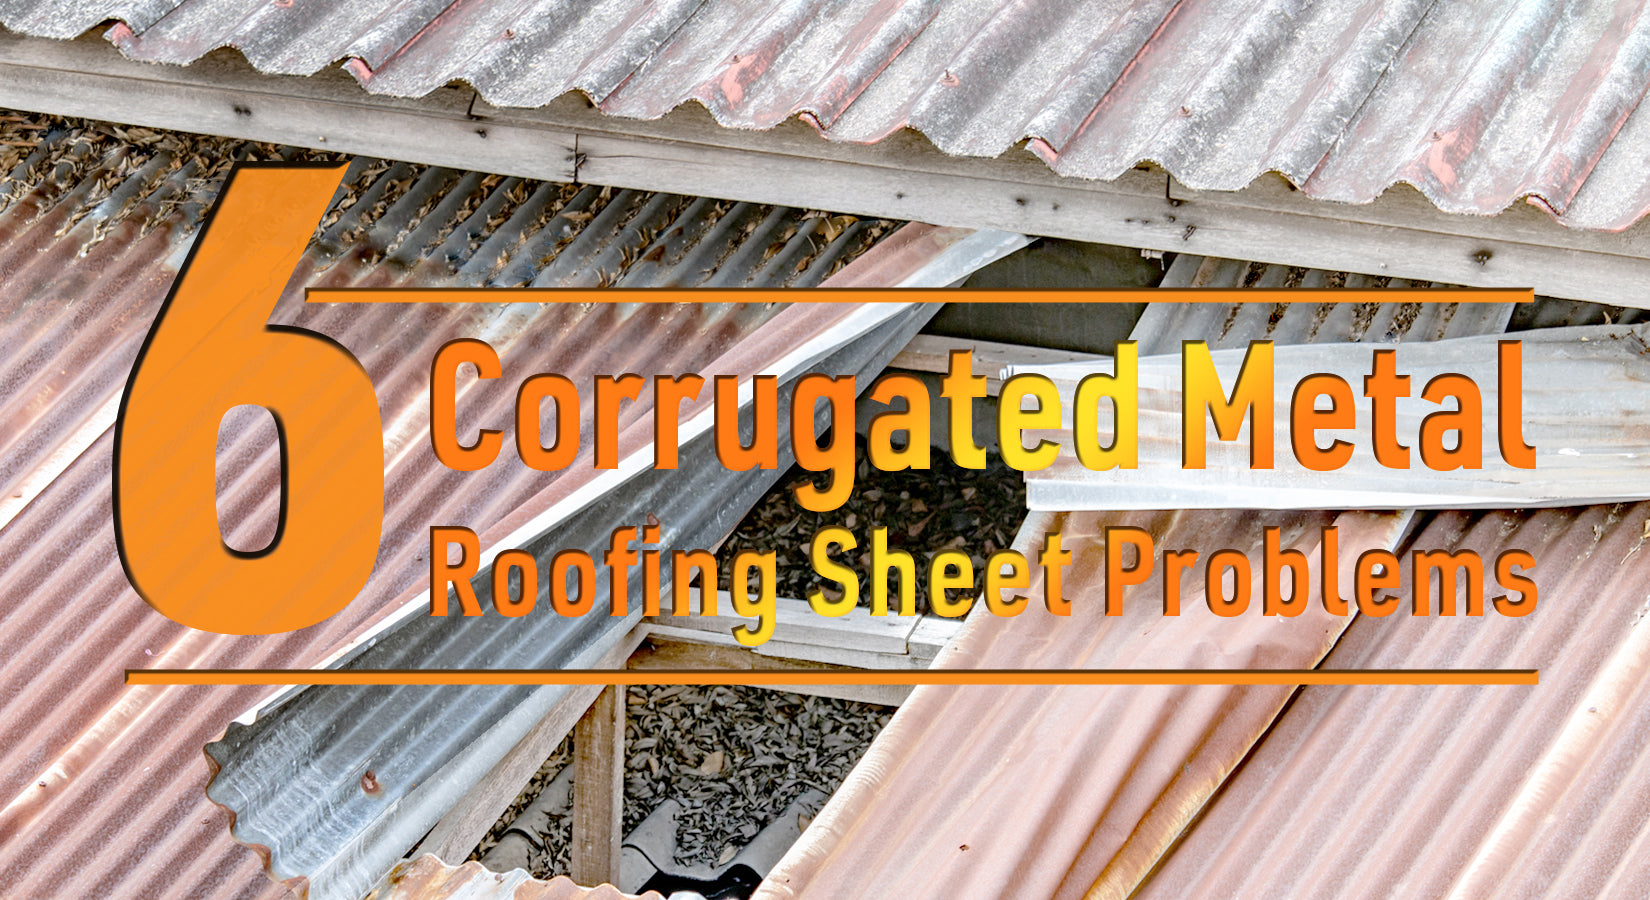 Why Corrugated Steel Roofing is so Popular Worldwide